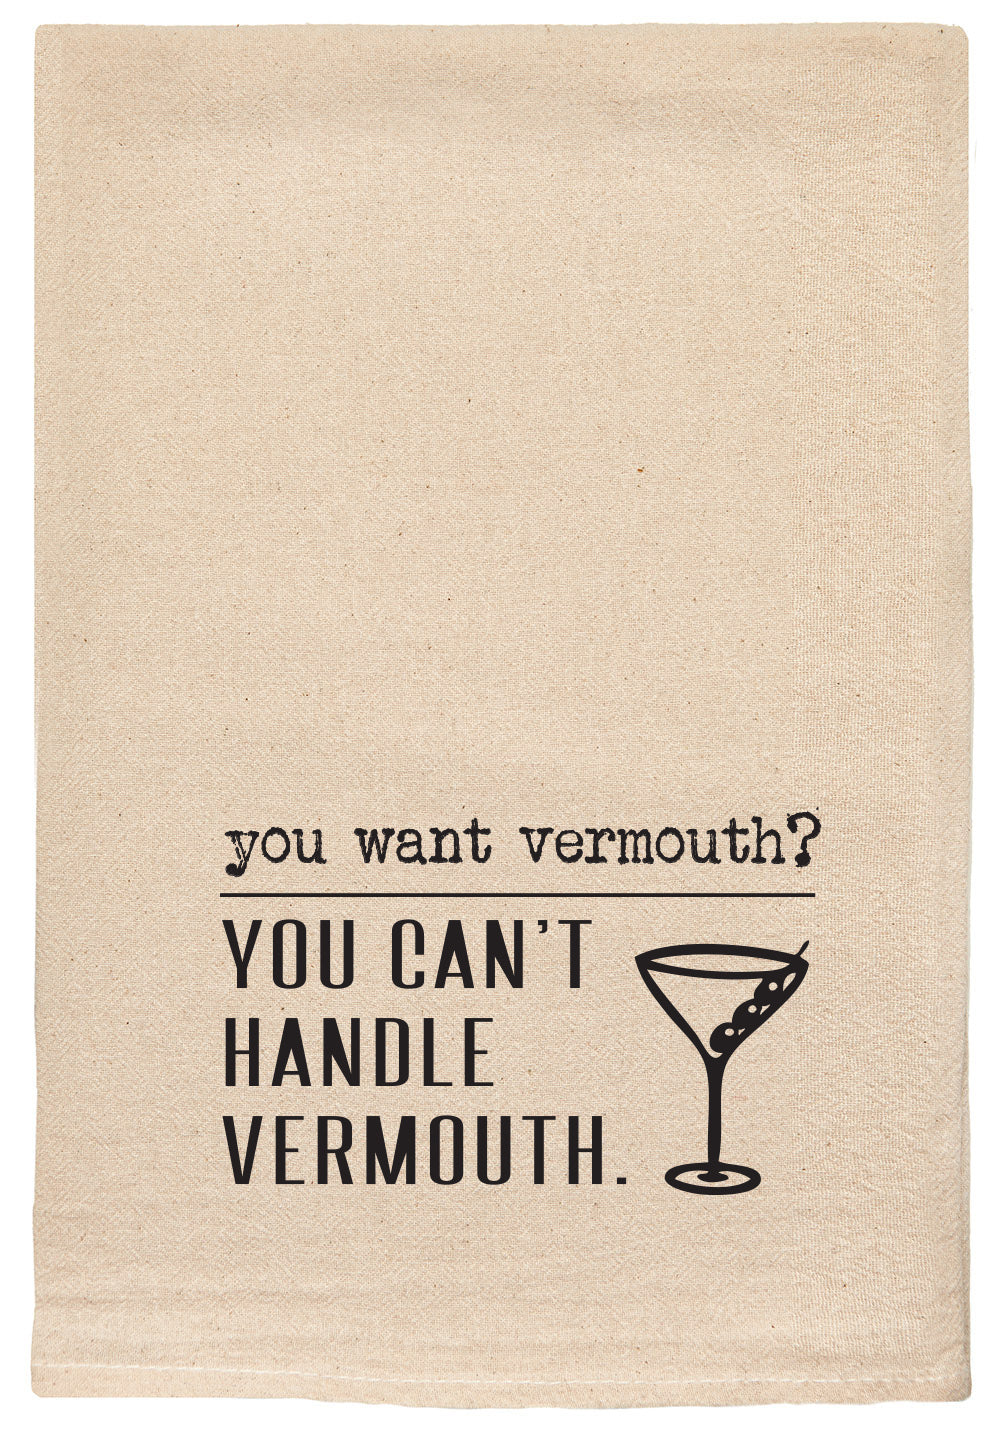 You want vermouth? You can't handle vermouth.